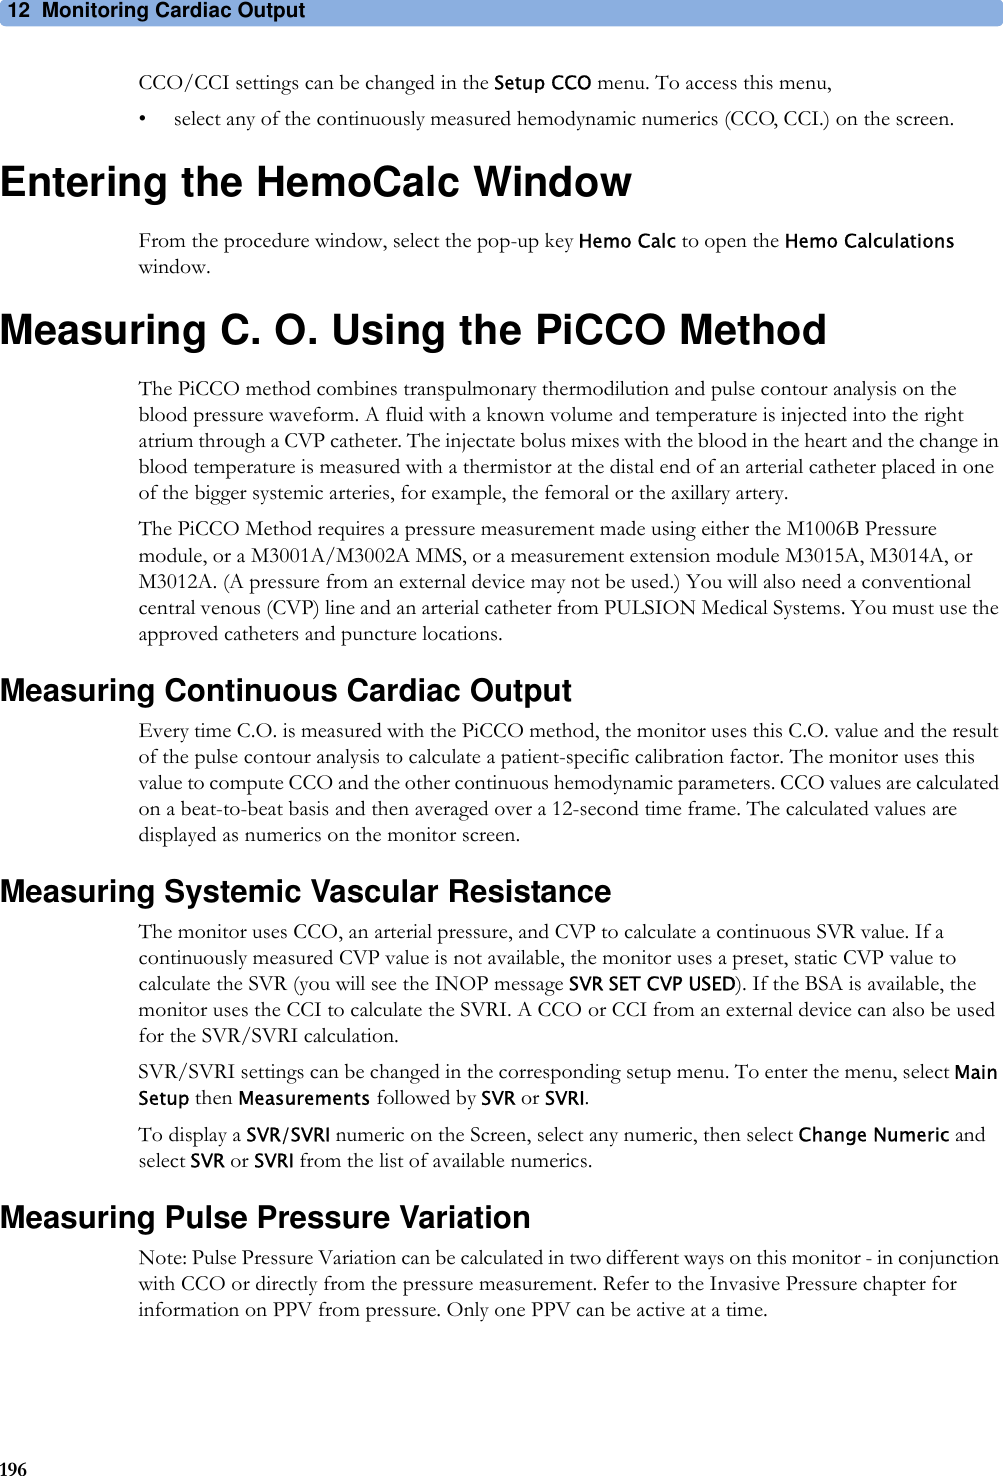 12 Monitoring Cardiac Output196CCO/CCI settings can be changed in the Setup CCO menu. To access this menu,• select any of the continuously measured hemodynamic numerics (CCO, CCI.) on the screen.Entering the HemoCalc WindowFrom the procedure window, select the pop-up key Hemo Calc to open the Hemo Calculations window.Measuring C. O. Using the PiCCO MethodThe PiCCO method combines transpulmonary thermodilution and pulse contour analysis on the blood pressure waveform. A fluid with a known volume and temperature is injected into the right atrium through a CVP catheter. The injectate bolus mixes with the blood in the heart and the change in blood temperature is measured with a thermistor at the distal end of an arterial catheter placed in one of the bigger systemic arteries, for example, the femoral or the axillary artery.The PiCCO Method requires a pressure measurement made using either the M1006B Pressure module, or a M3001A/M3002A MMS, or a measurement extension module M3015A, M3014A, or M3012A. (A pressure from an external device may not be used.) You will also need a conventional central venous (CVP) line and an arterial catheter from PULSION Medical Systems. You must use the approved catheters and puncture locations.Measuring Continuous Cardiac OutputEvery time C.O. is measured with the PiCCO method, the monitor uses this C.O. value and the result of the pulse contour analysis to calculate a patient-specific calibration factor. The monitor uses this value to compute CCO and the other continuous hemodynamic parameters. CCO values are calculated on a beat-to-beat basis and then averaged over a 12-second time frame. The calculated values are displayed as numerics on the monitor screen.Measuring Systemic Vascular ResistanceThe monitor uses CCO, an arterial pressure, and CVP to calculate a continuous SVR value. If a continuously measured CVP value is not available, the monitor uses a preset, static CVP value to calculate the SVR (you will see the INOP message SVR SET CVP USED). If the BSA is available, the monitor uses the CCI to calculate the SVRI. A CCO or CCI from an external device can also be used for the SVR/SVRI calculation.SVR/SVRI settings can be changed in the corresponding setup menu. To enter the menu, select Main Setup then Measurements followed by SVR or SVRI.To display a SVR/SVRI numeric on the Screen, select any numeric, then select Change Numeric and select SVR or SVRI from the list of available numerics.Measuring Pulse Pressure VariationNote: Pulse Pressure Variation can be calculated in two different ways on this monitor - in conjunction with CCO or directly from the pressure measurement. Refer to the Invasive Pressure chapter for information on PPV from pressure. Only one PPV can be active at a time.